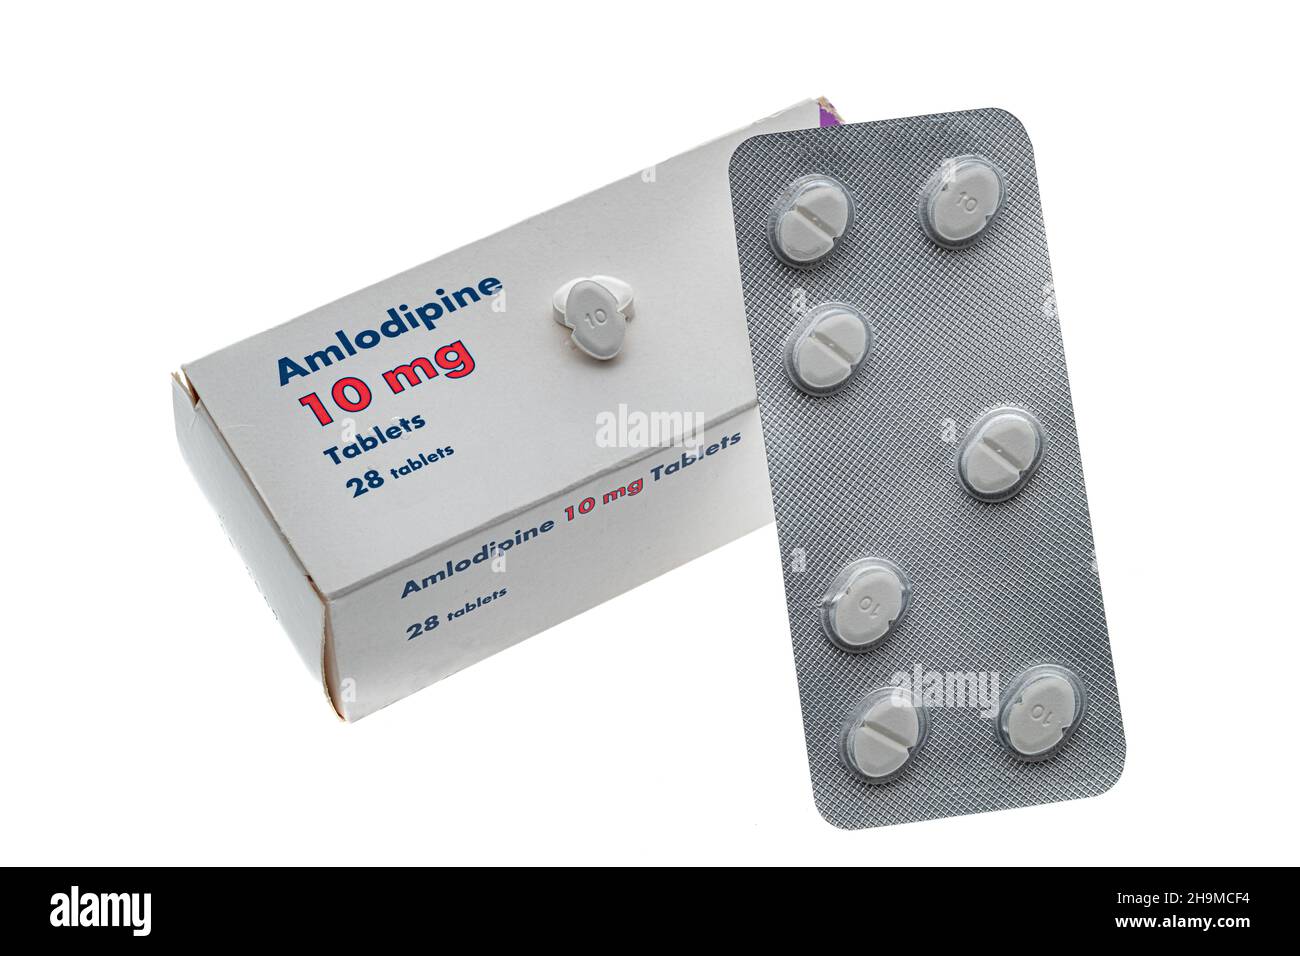 A generic box of Amlodipine pills commonly used for the treatment of hypertension.  This is the generic version of the drug Norvasc. Stock Photo